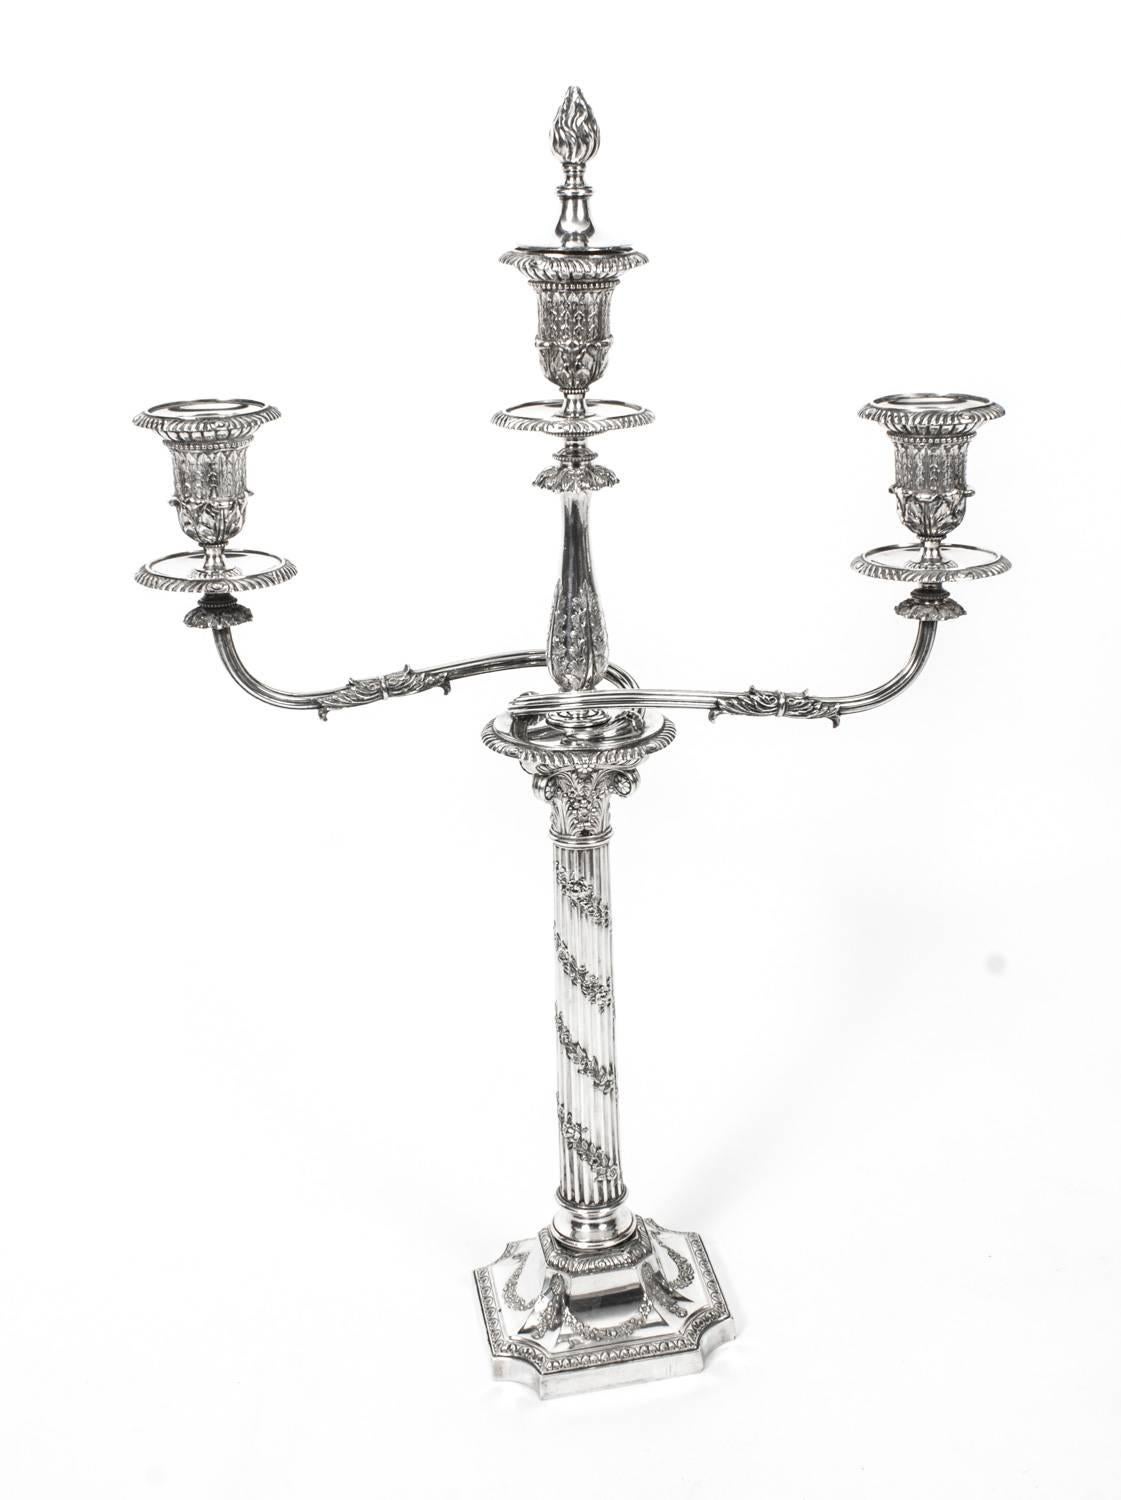 This is a superb pair of antique Victorian silver plated, three light, two-branch table Corinthian column candelabra, circa 1880 in date, and bearing the makers mark of the renowned silversmiths Horace Woodward & Co. of Birmingham England.
 
The